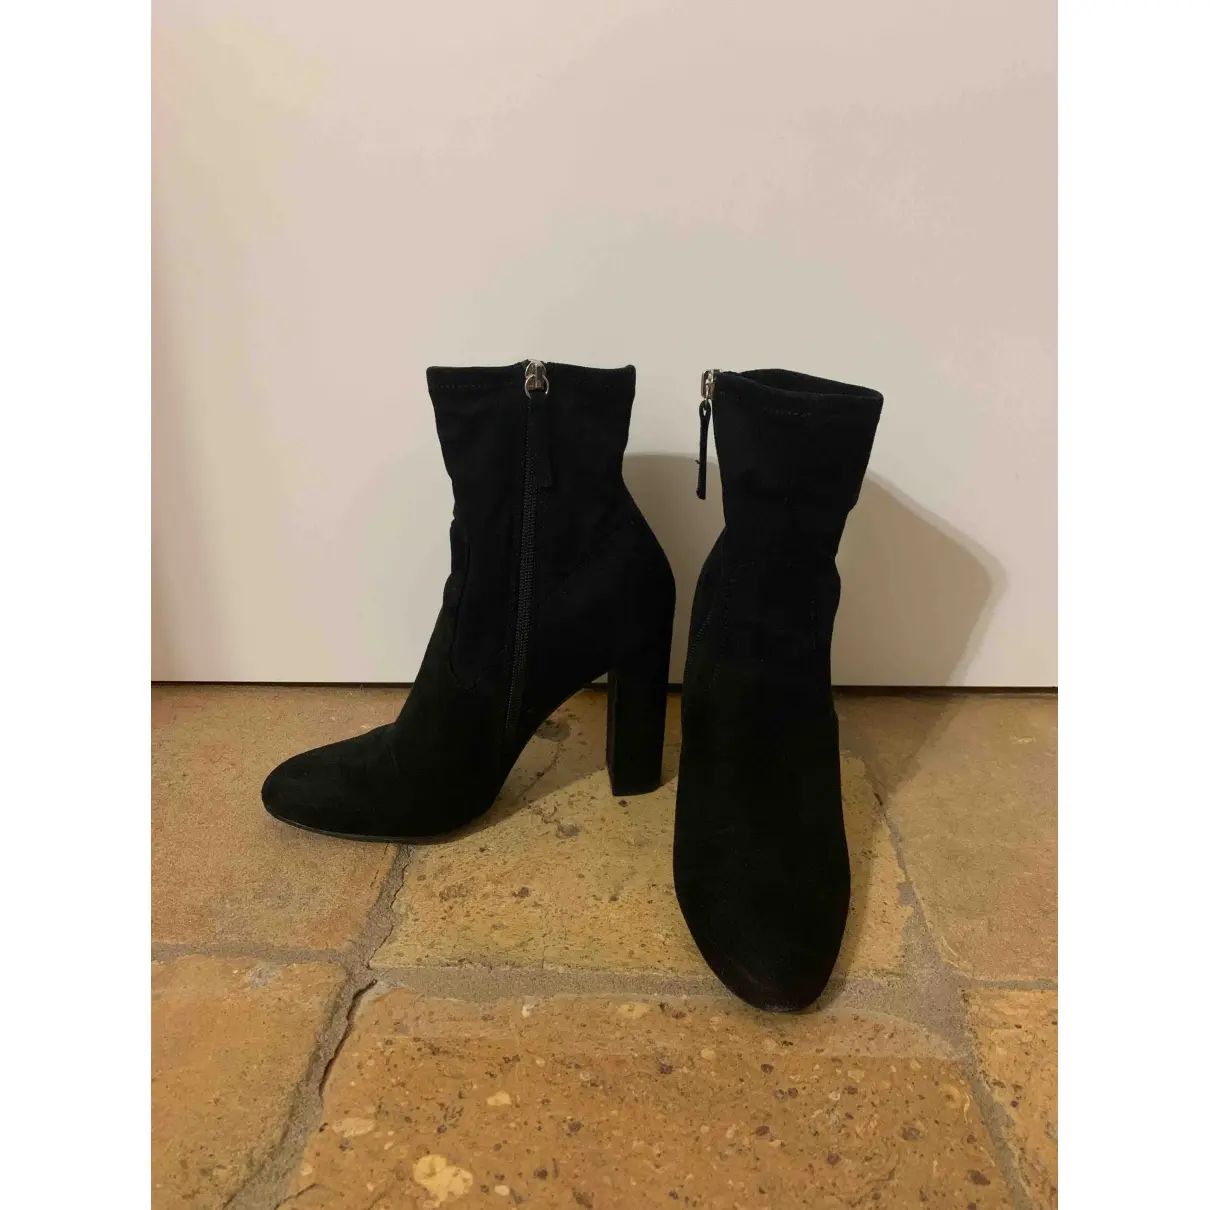 Steve Madden Ankle boots for sale